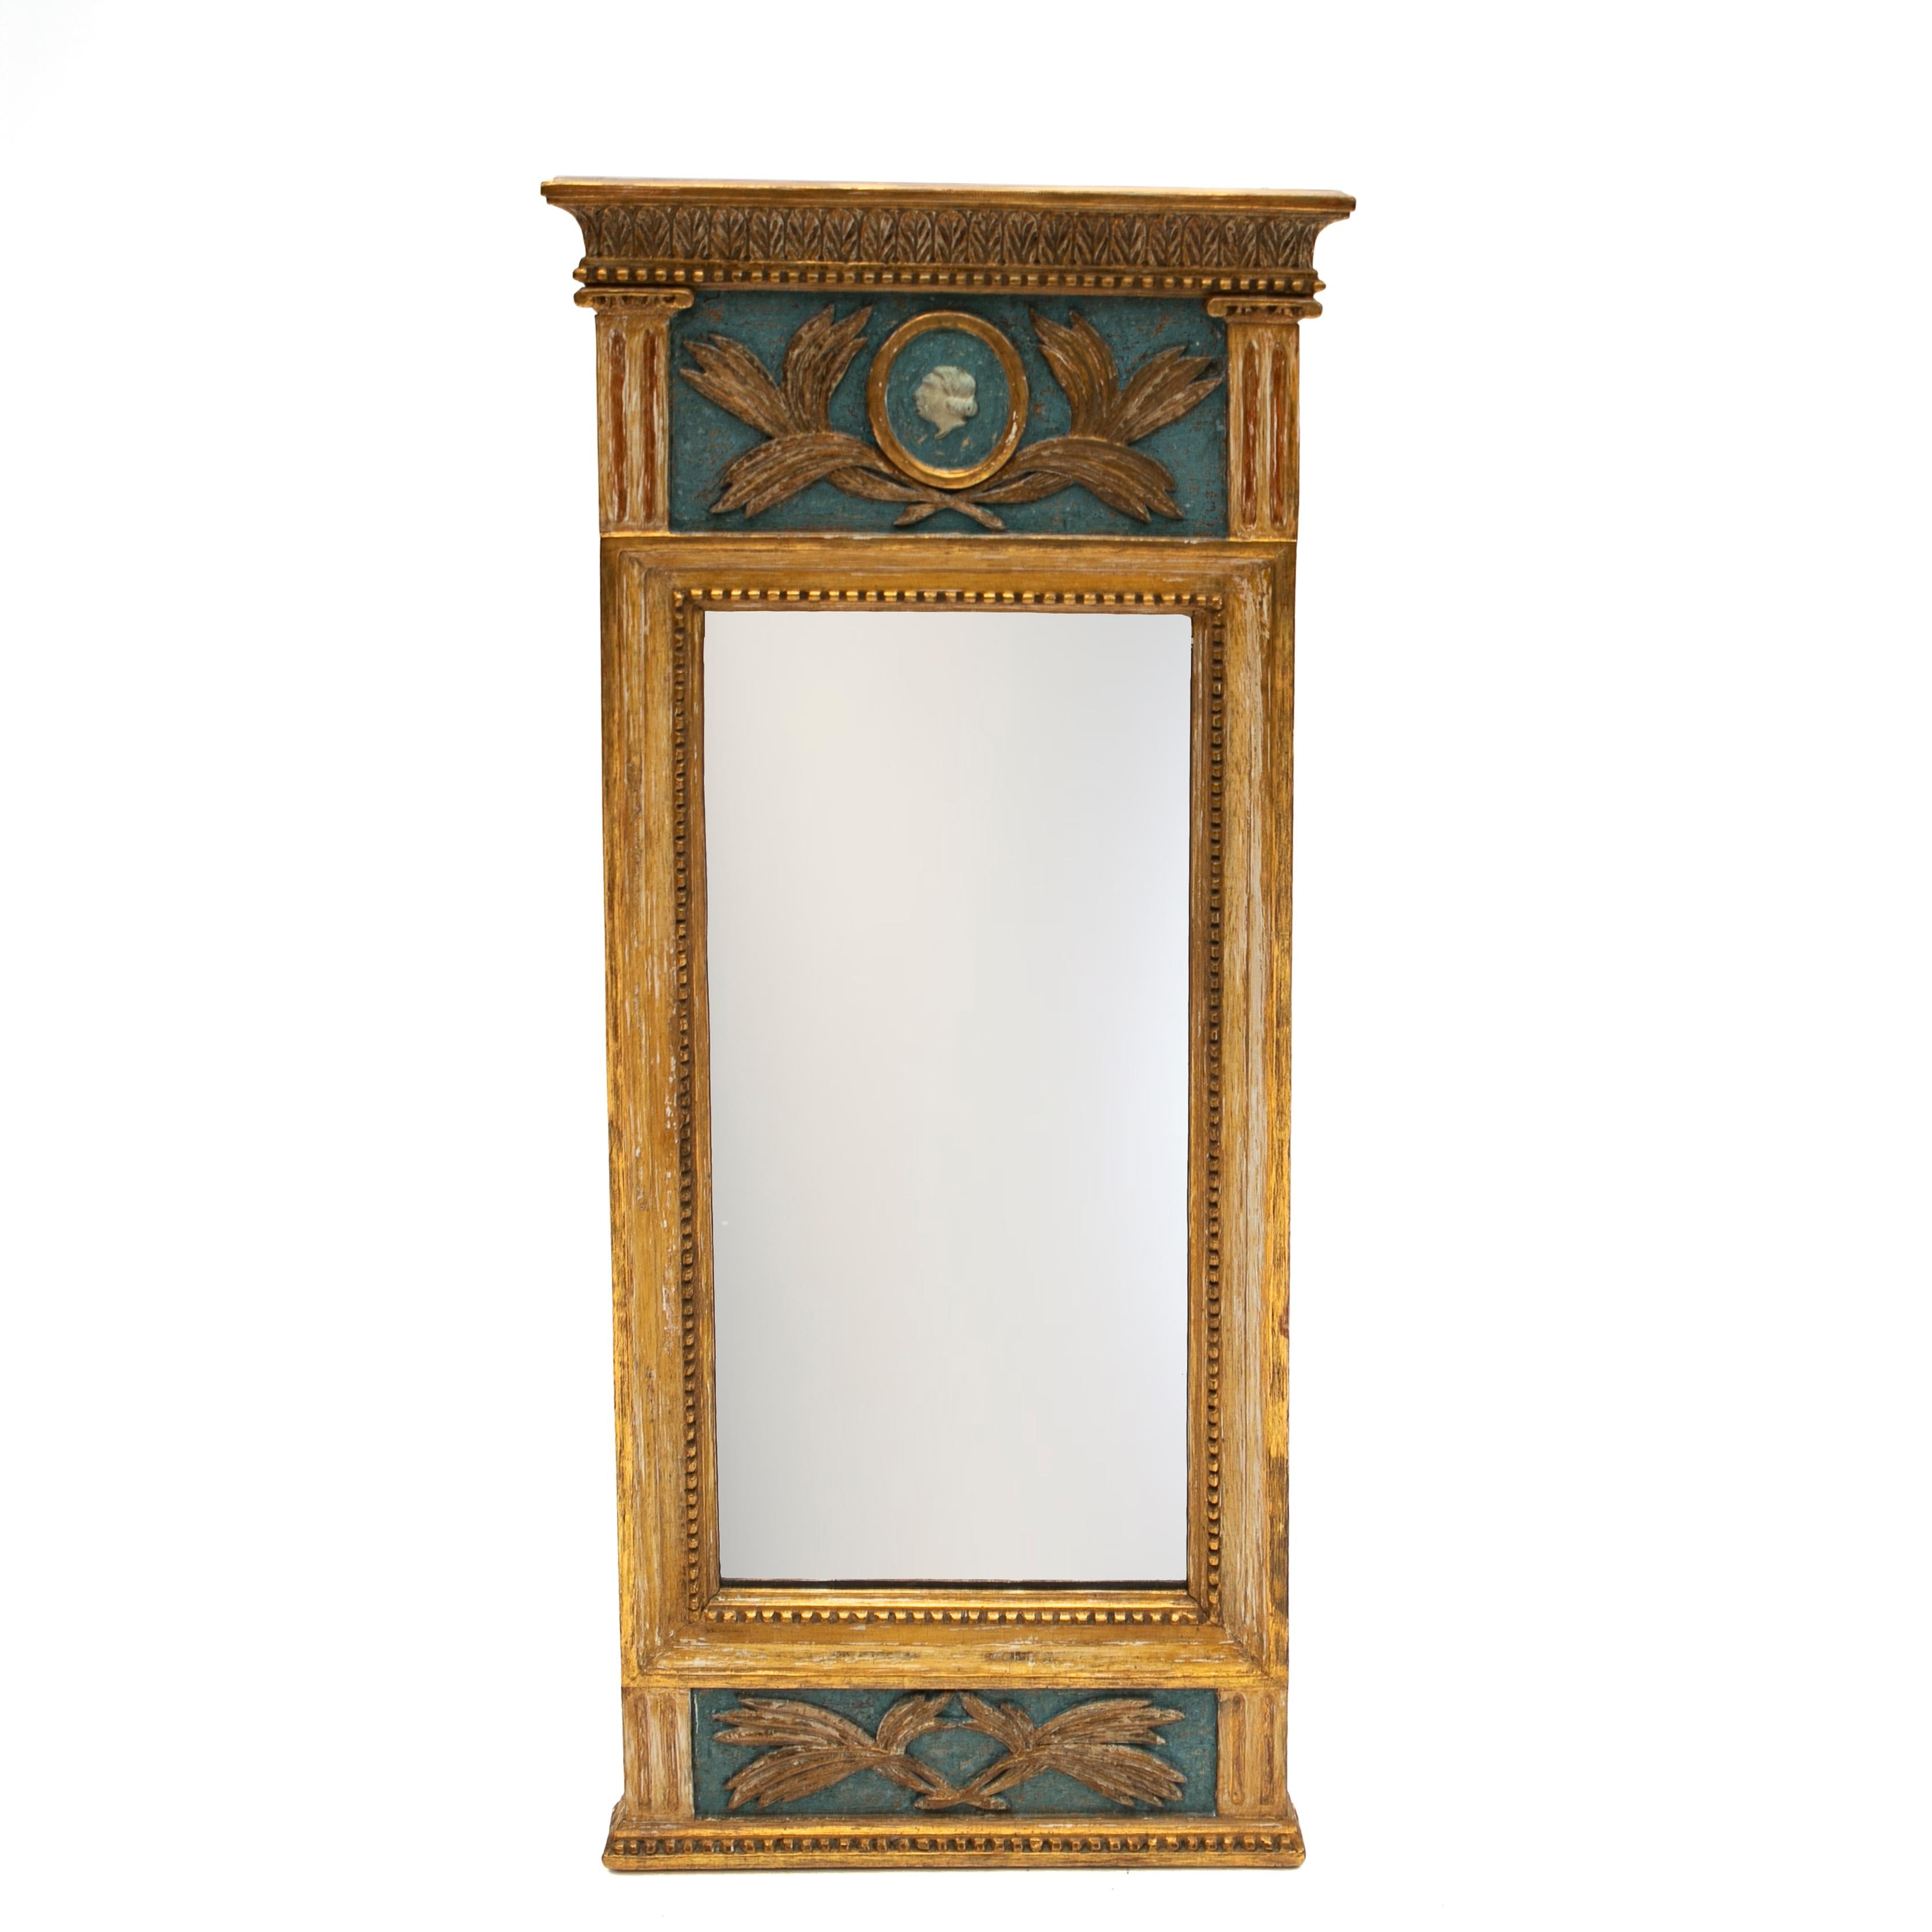 Antique Swedish rectangular wall mirror made of handcrafted giltwood, in good condition.
Frame enhanced by softly painted blue background and hand-carved elements, upper section of the mirror is adorned with a gesso head medallion in profile and